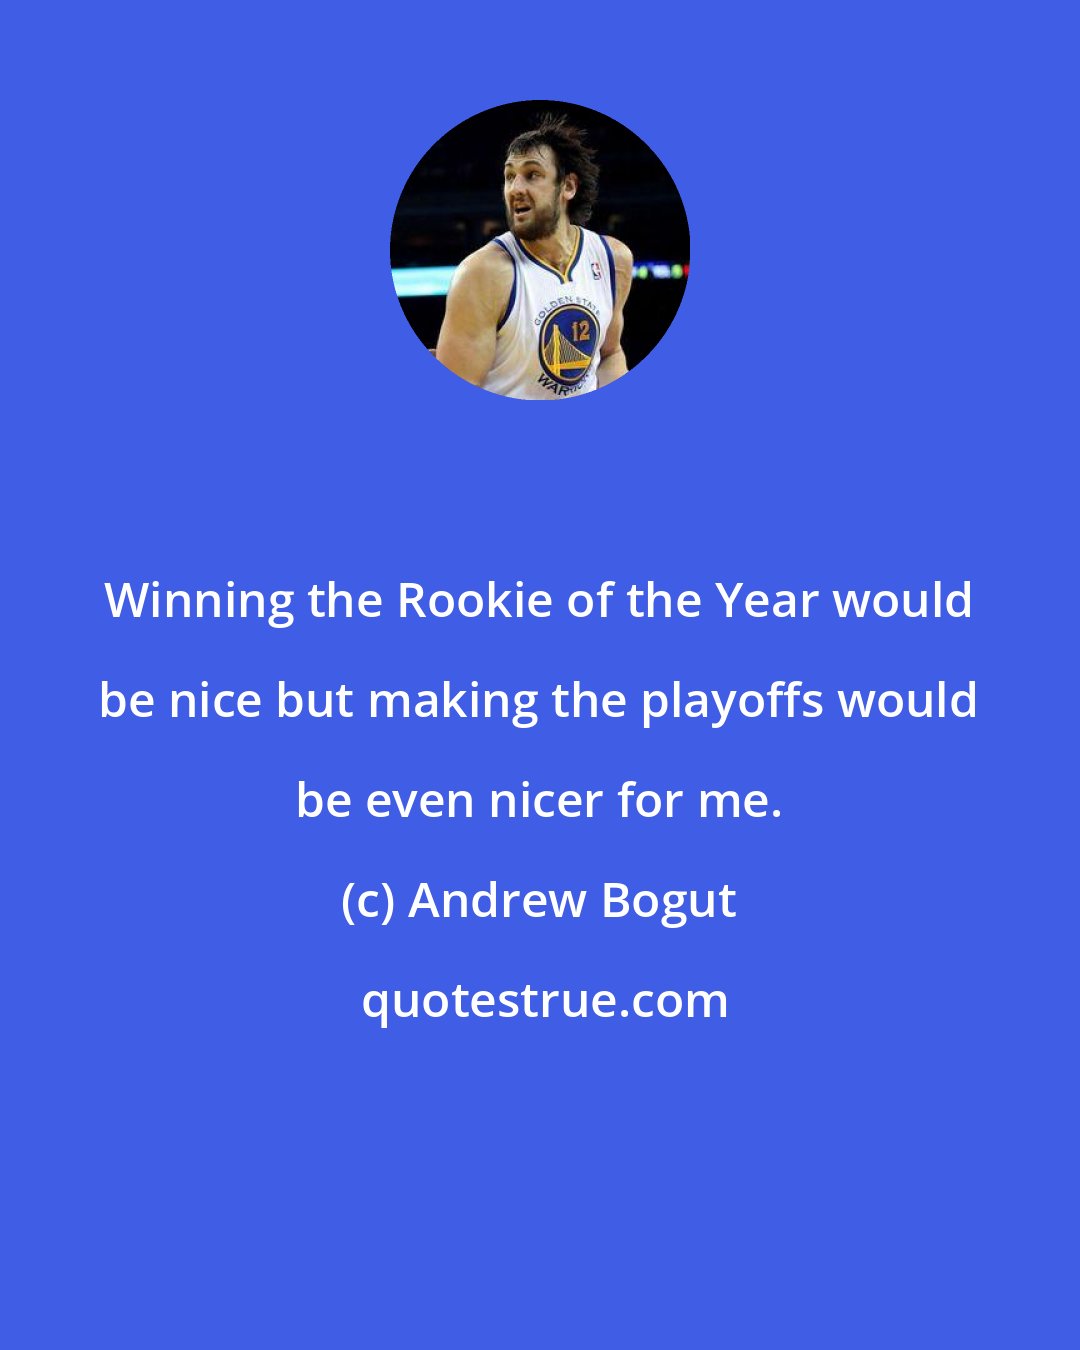 Andrew Bogut: Winning the Rookie of the Year would be nice but making the playoffs would be even nicer for me.